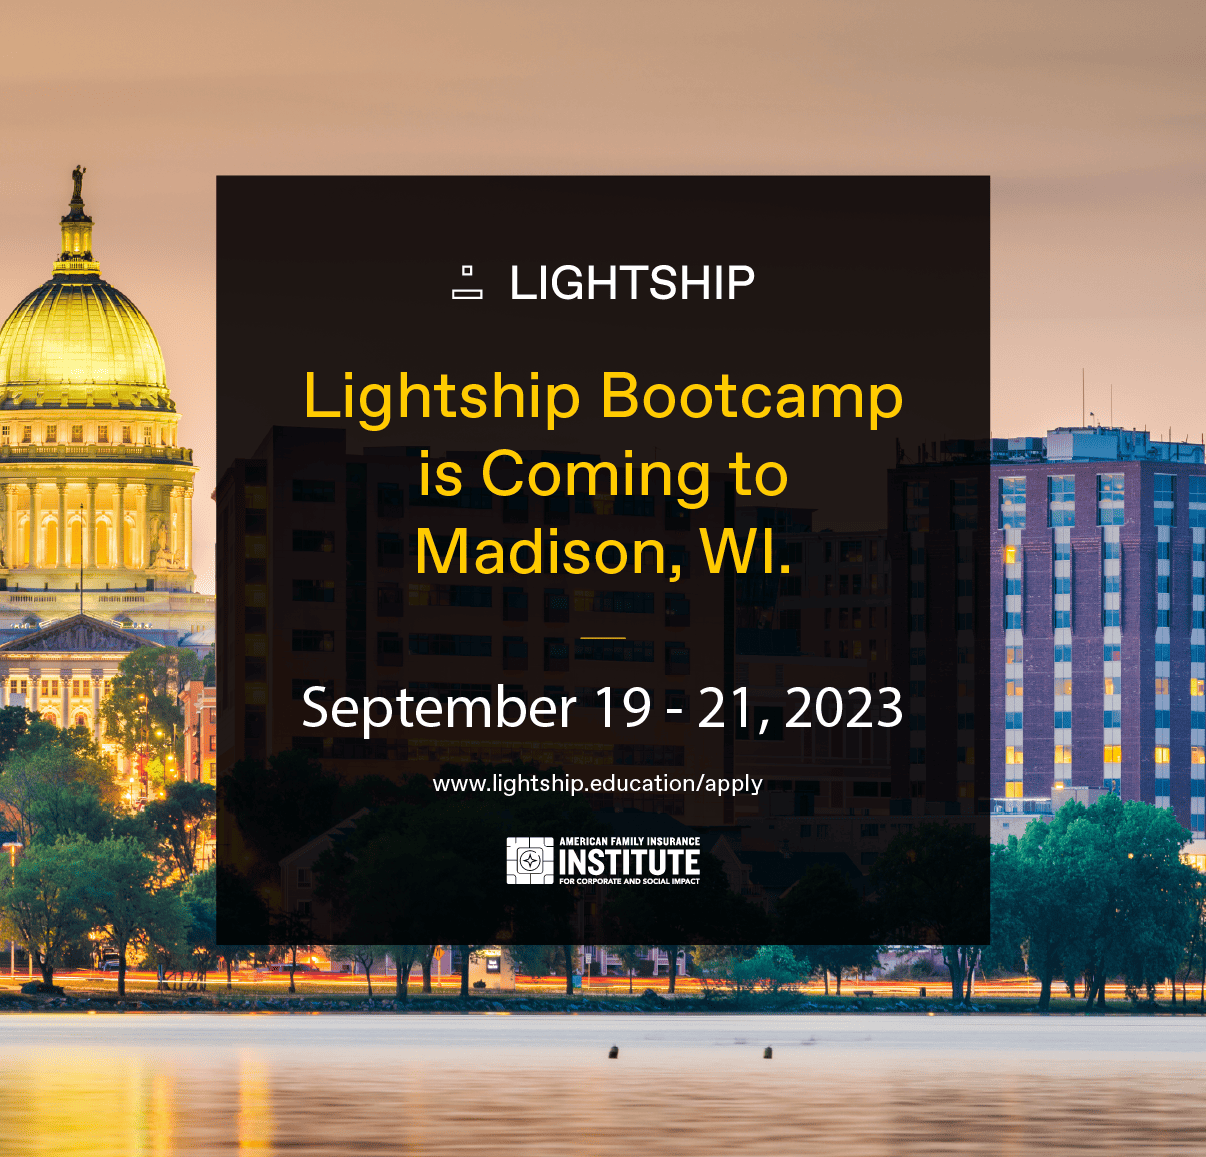 Lightship Bootcamp is coming to Madison, WI on September 19-21, 2023.